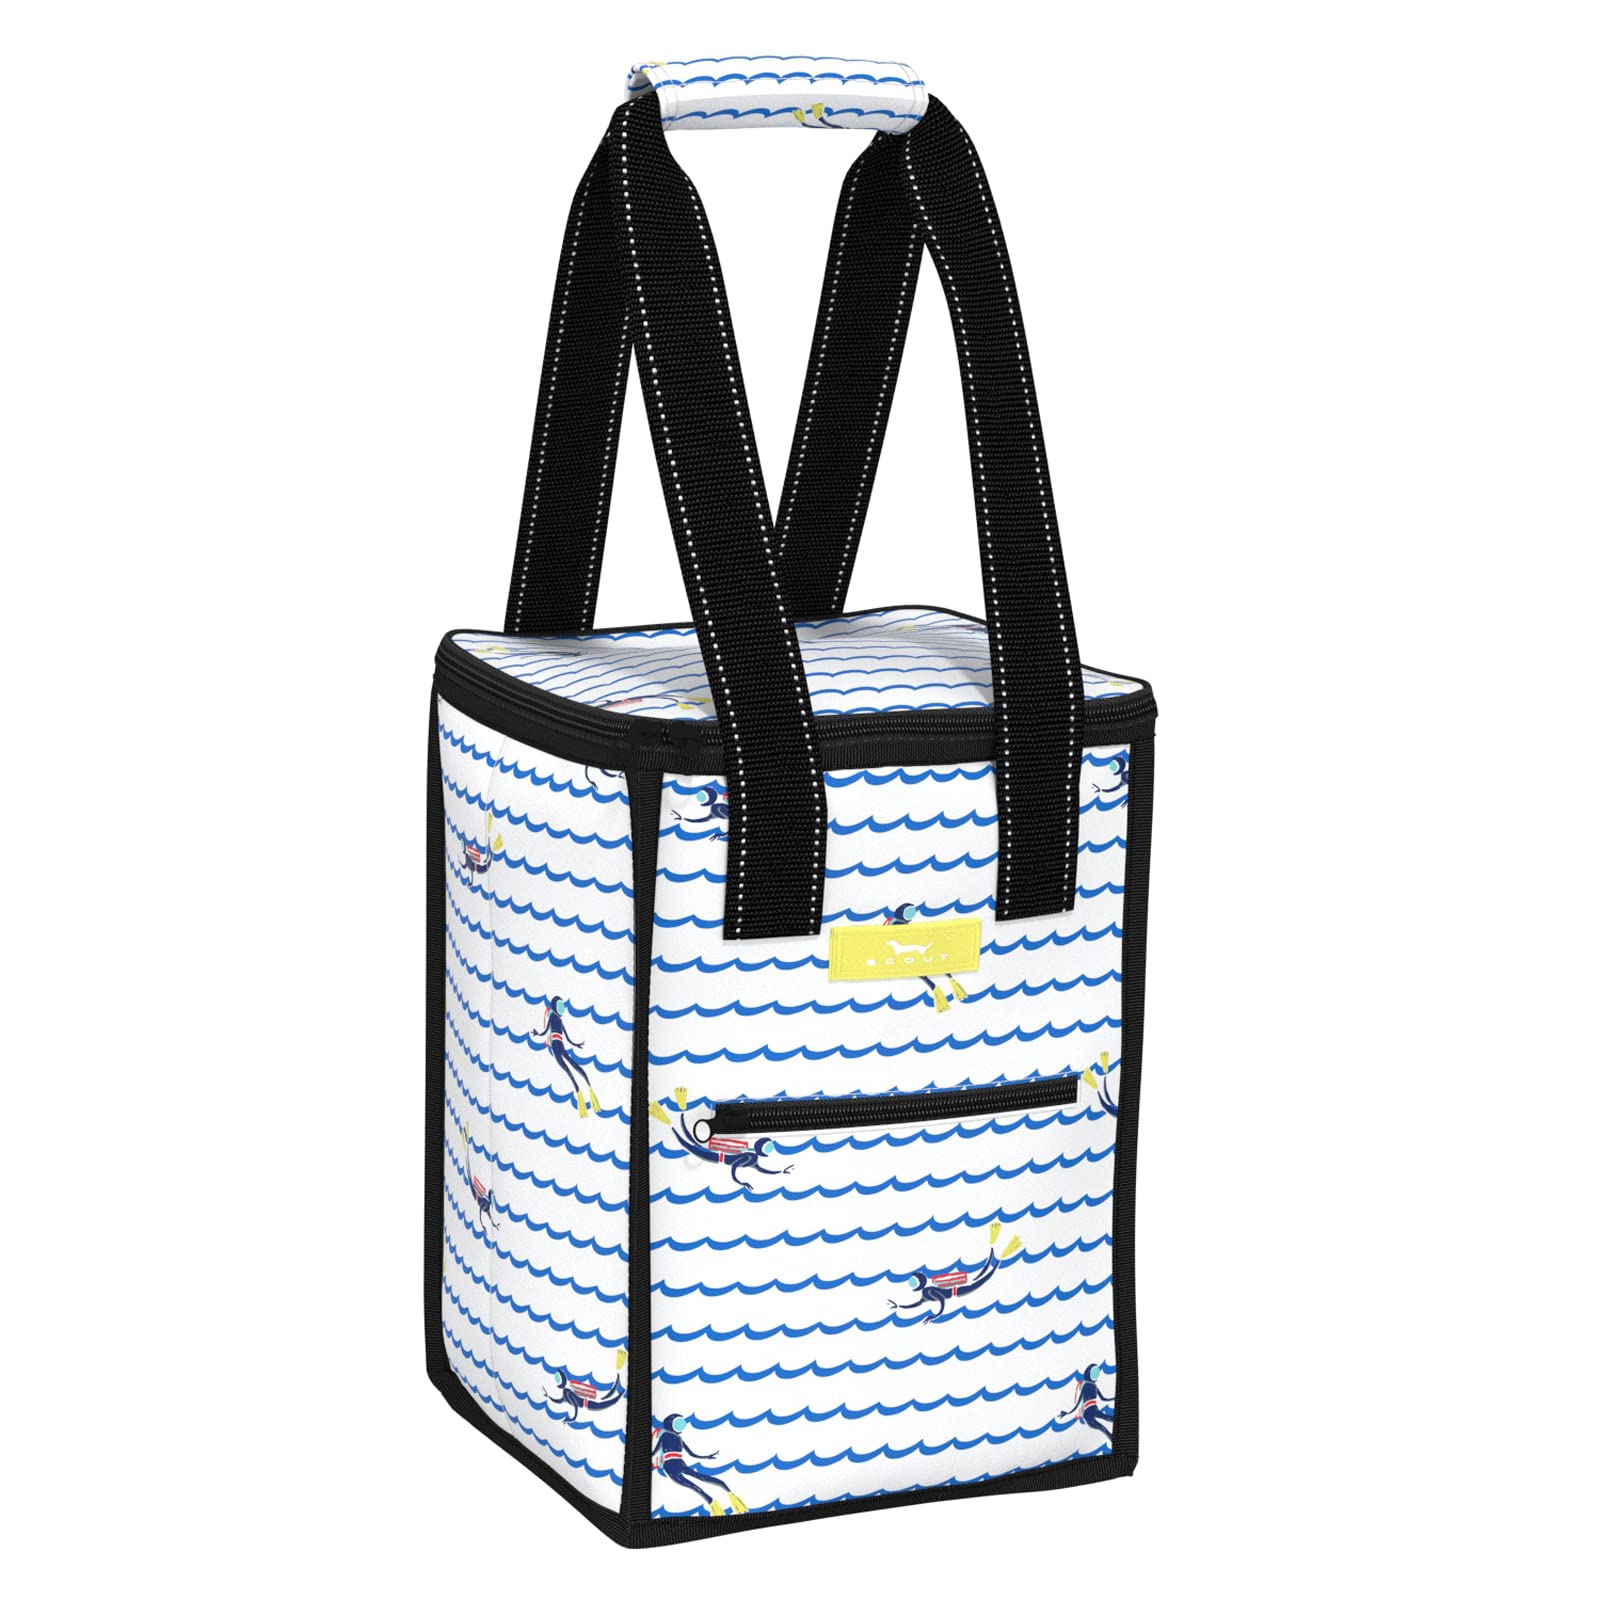 Dual-Compartment Insulated Cooler Bag